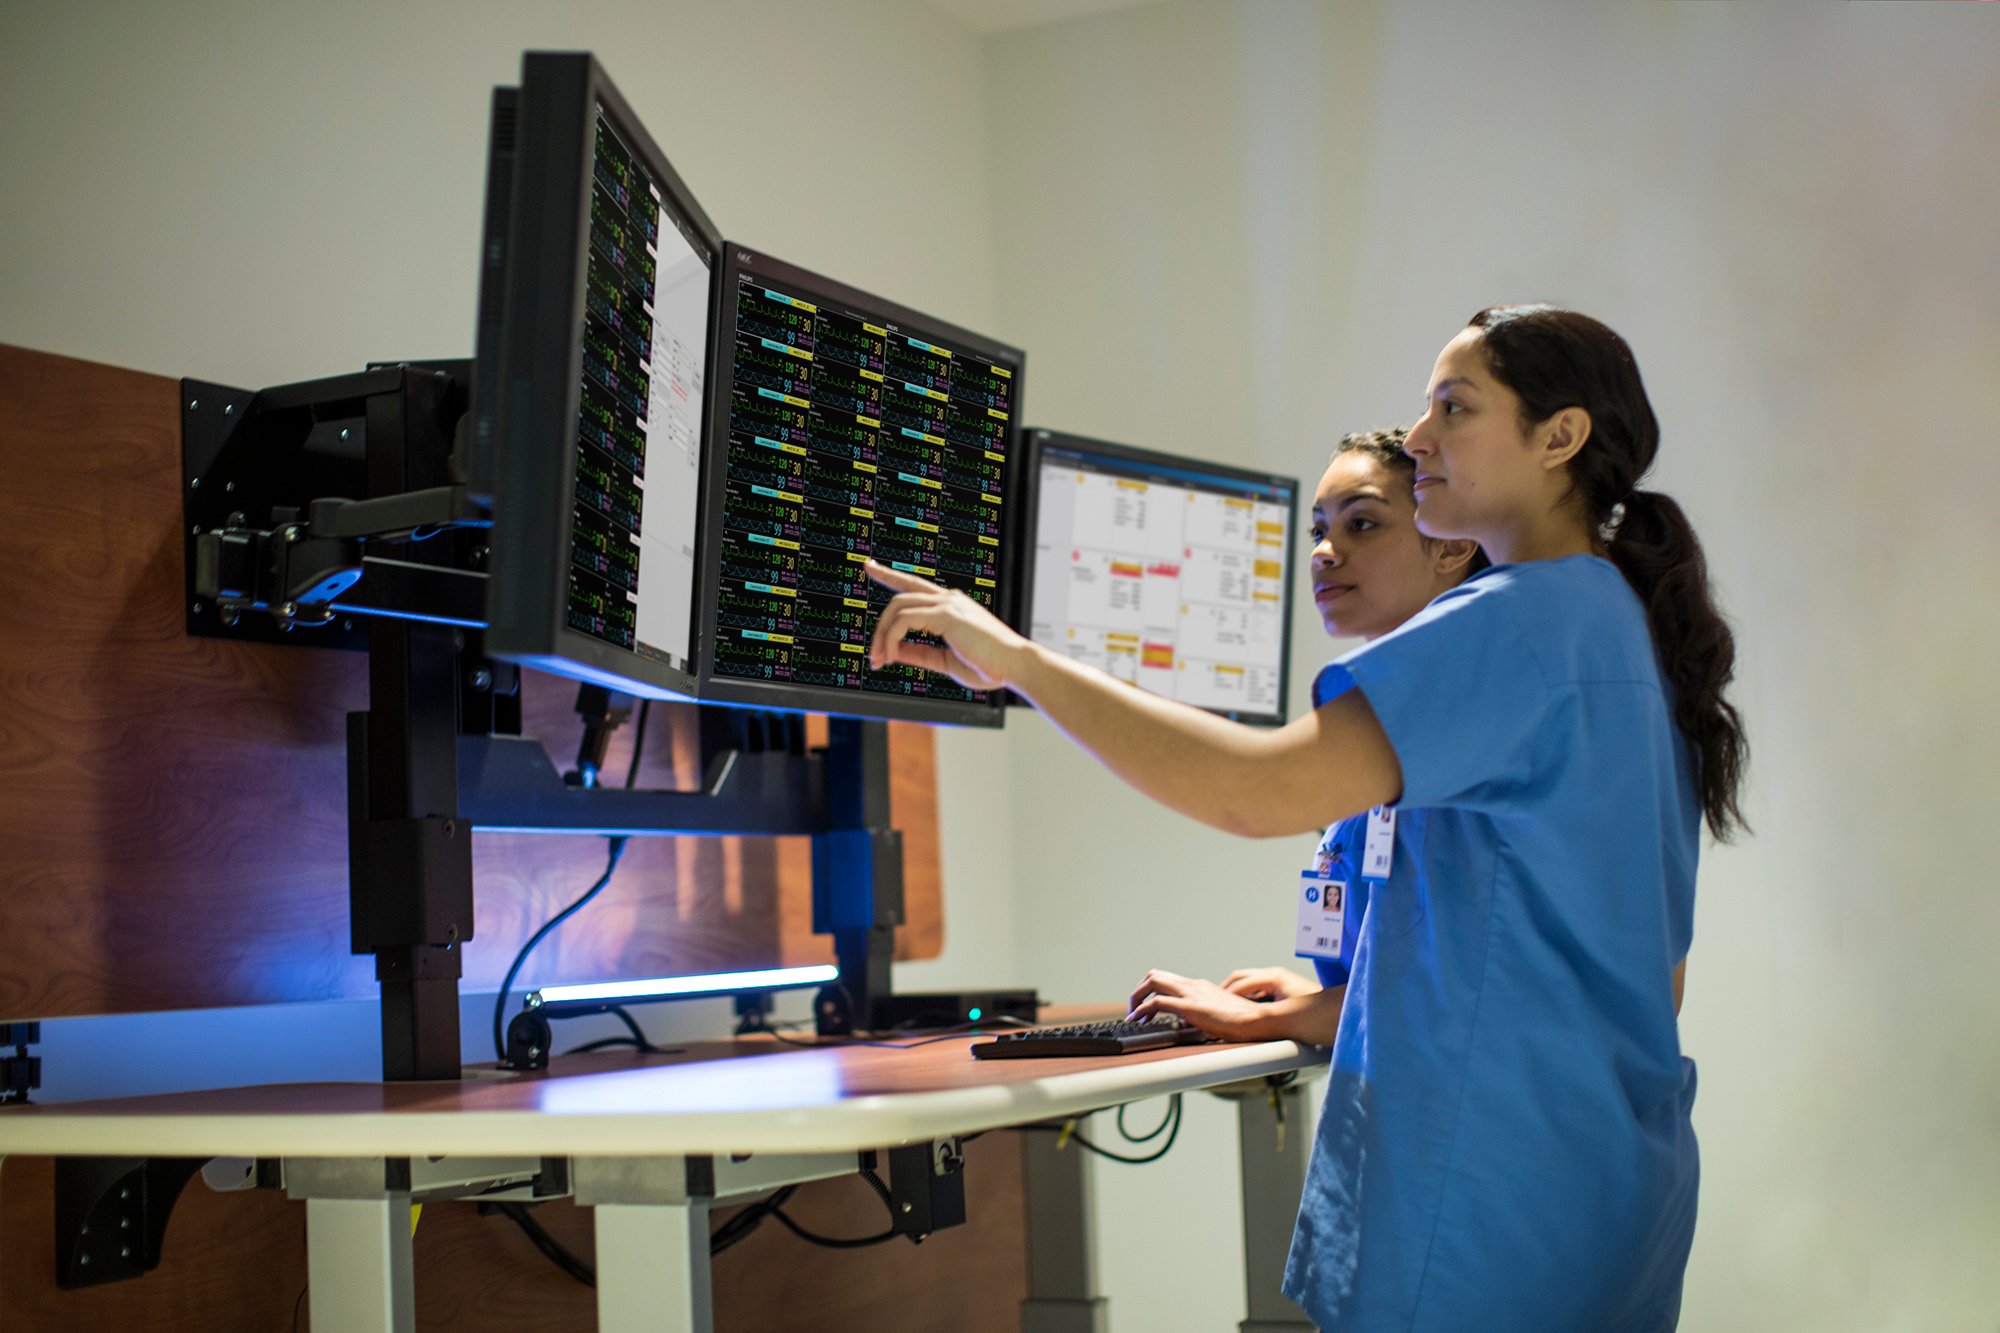 Philips connects Capsule's vendor-neutral data collection with its centralized patient monitoring hub